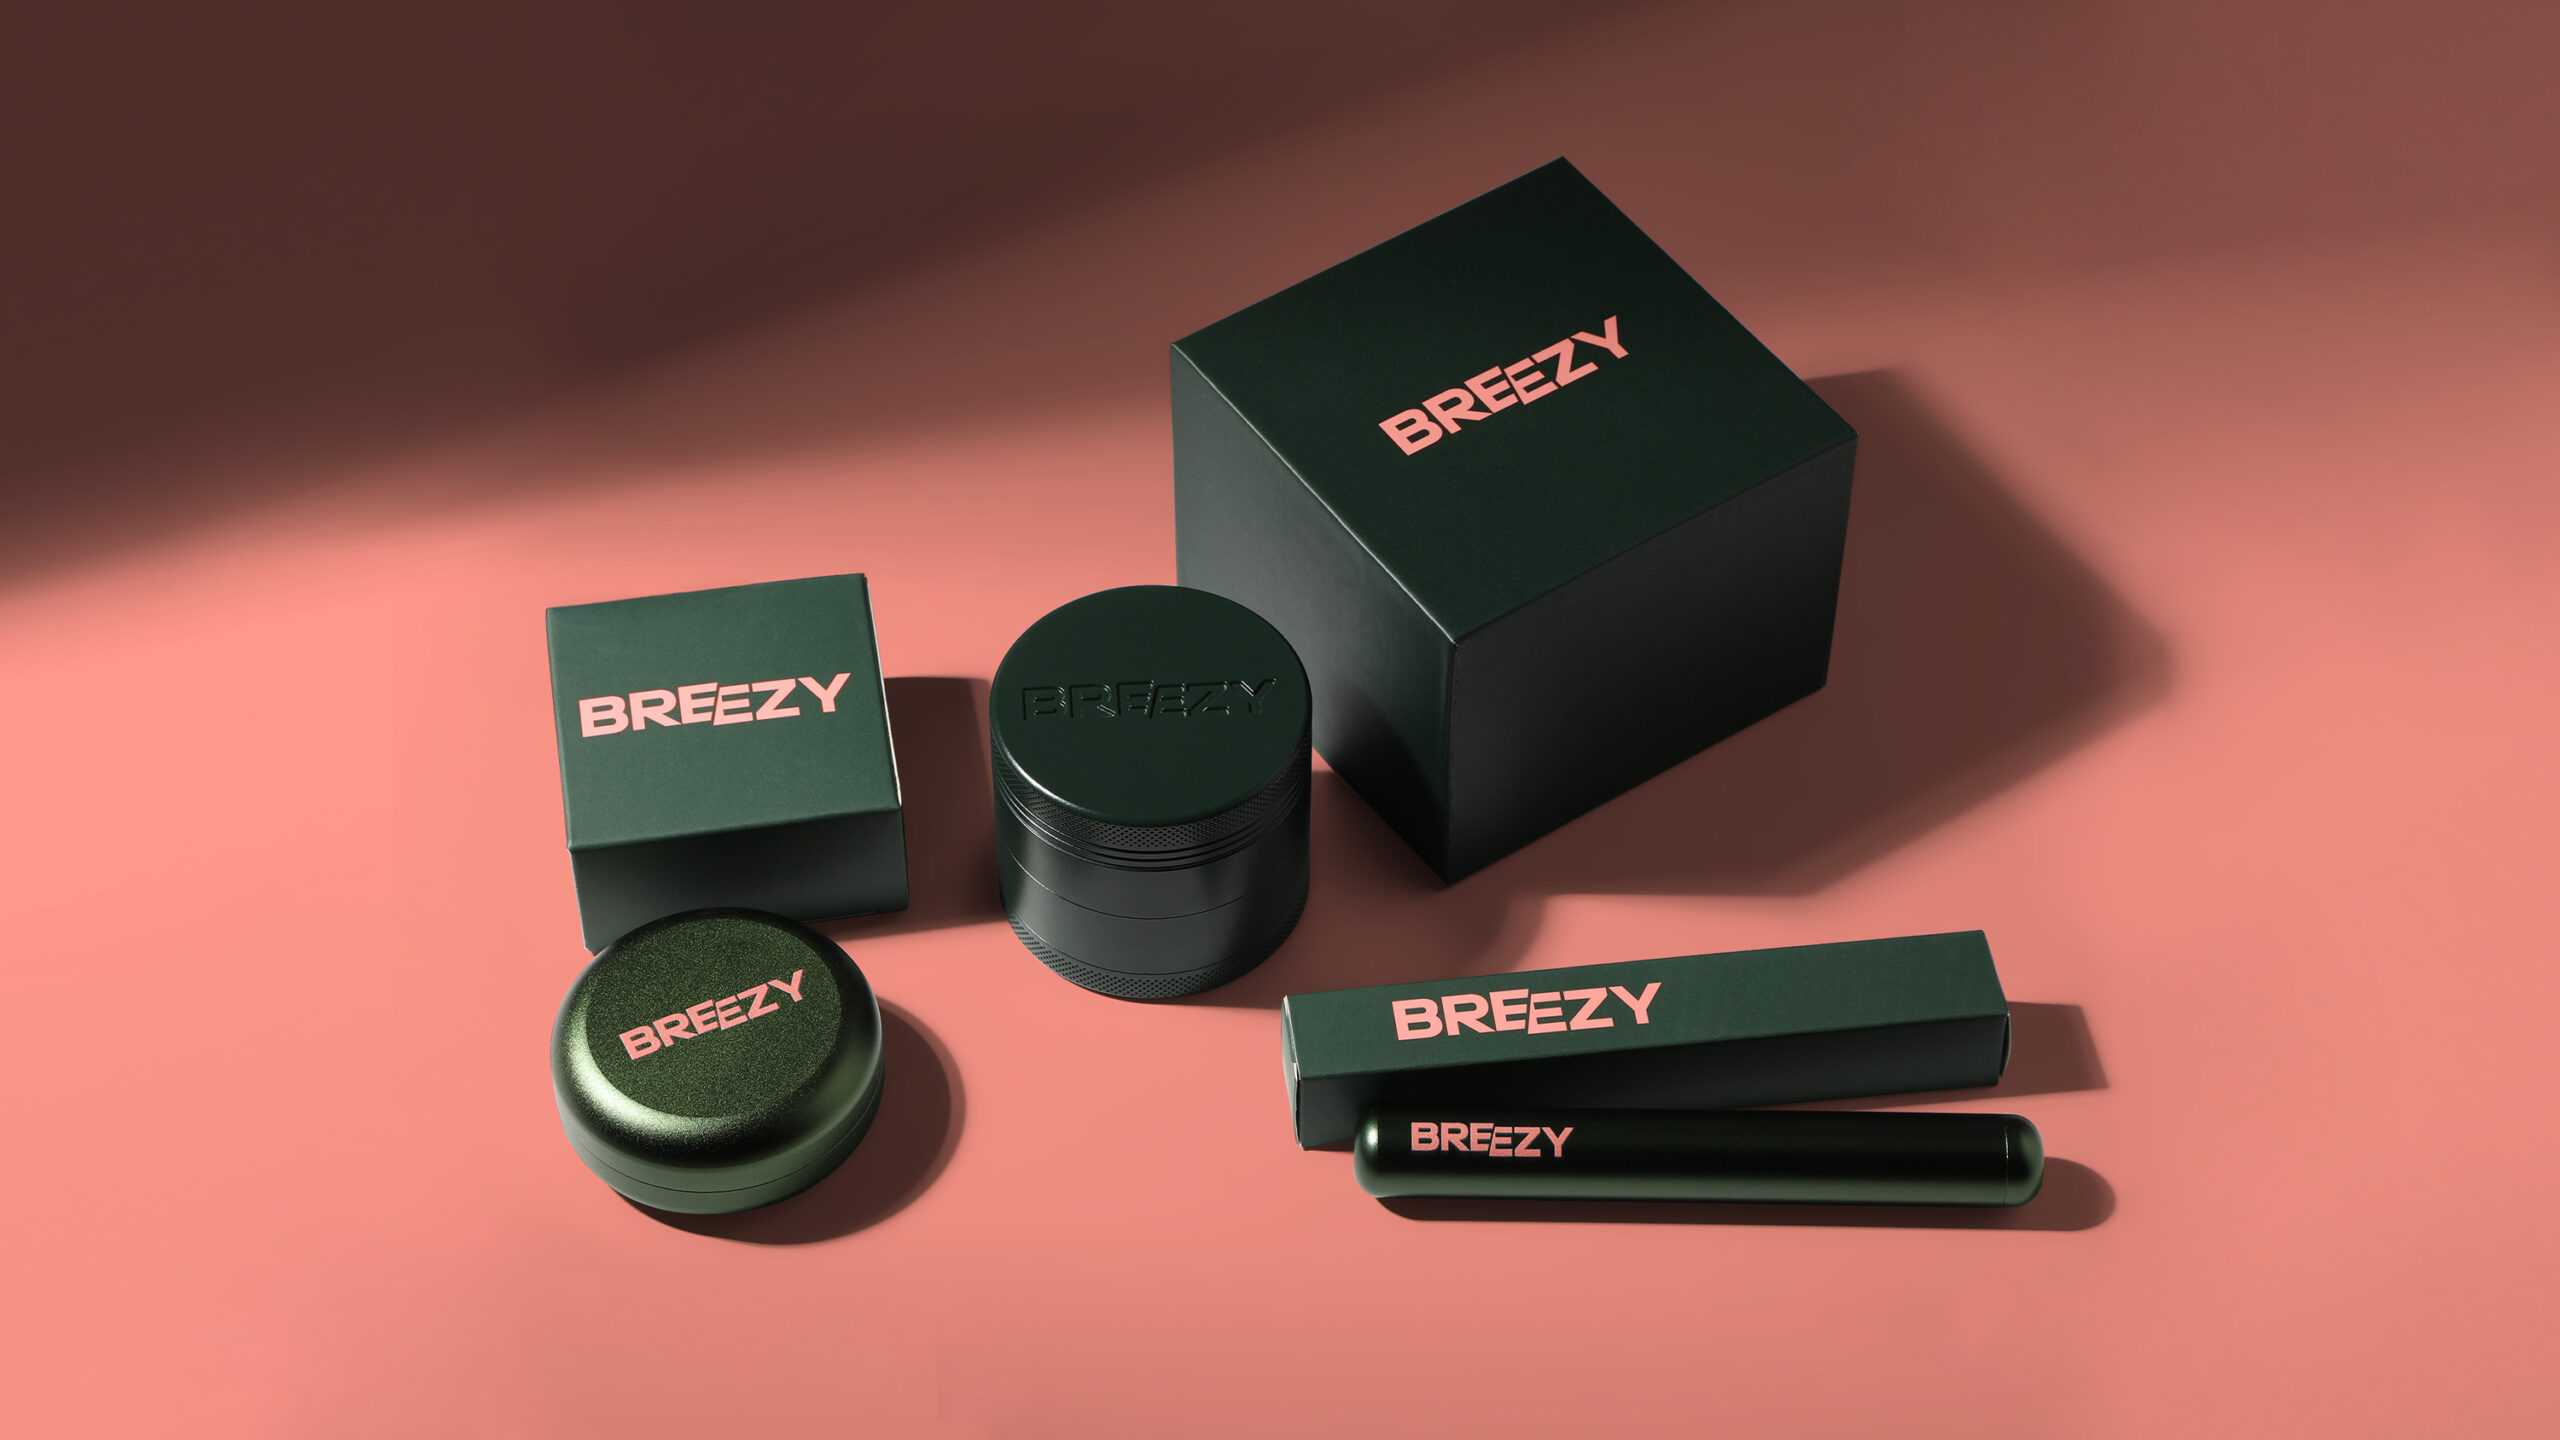 Product Mockups for Breezy